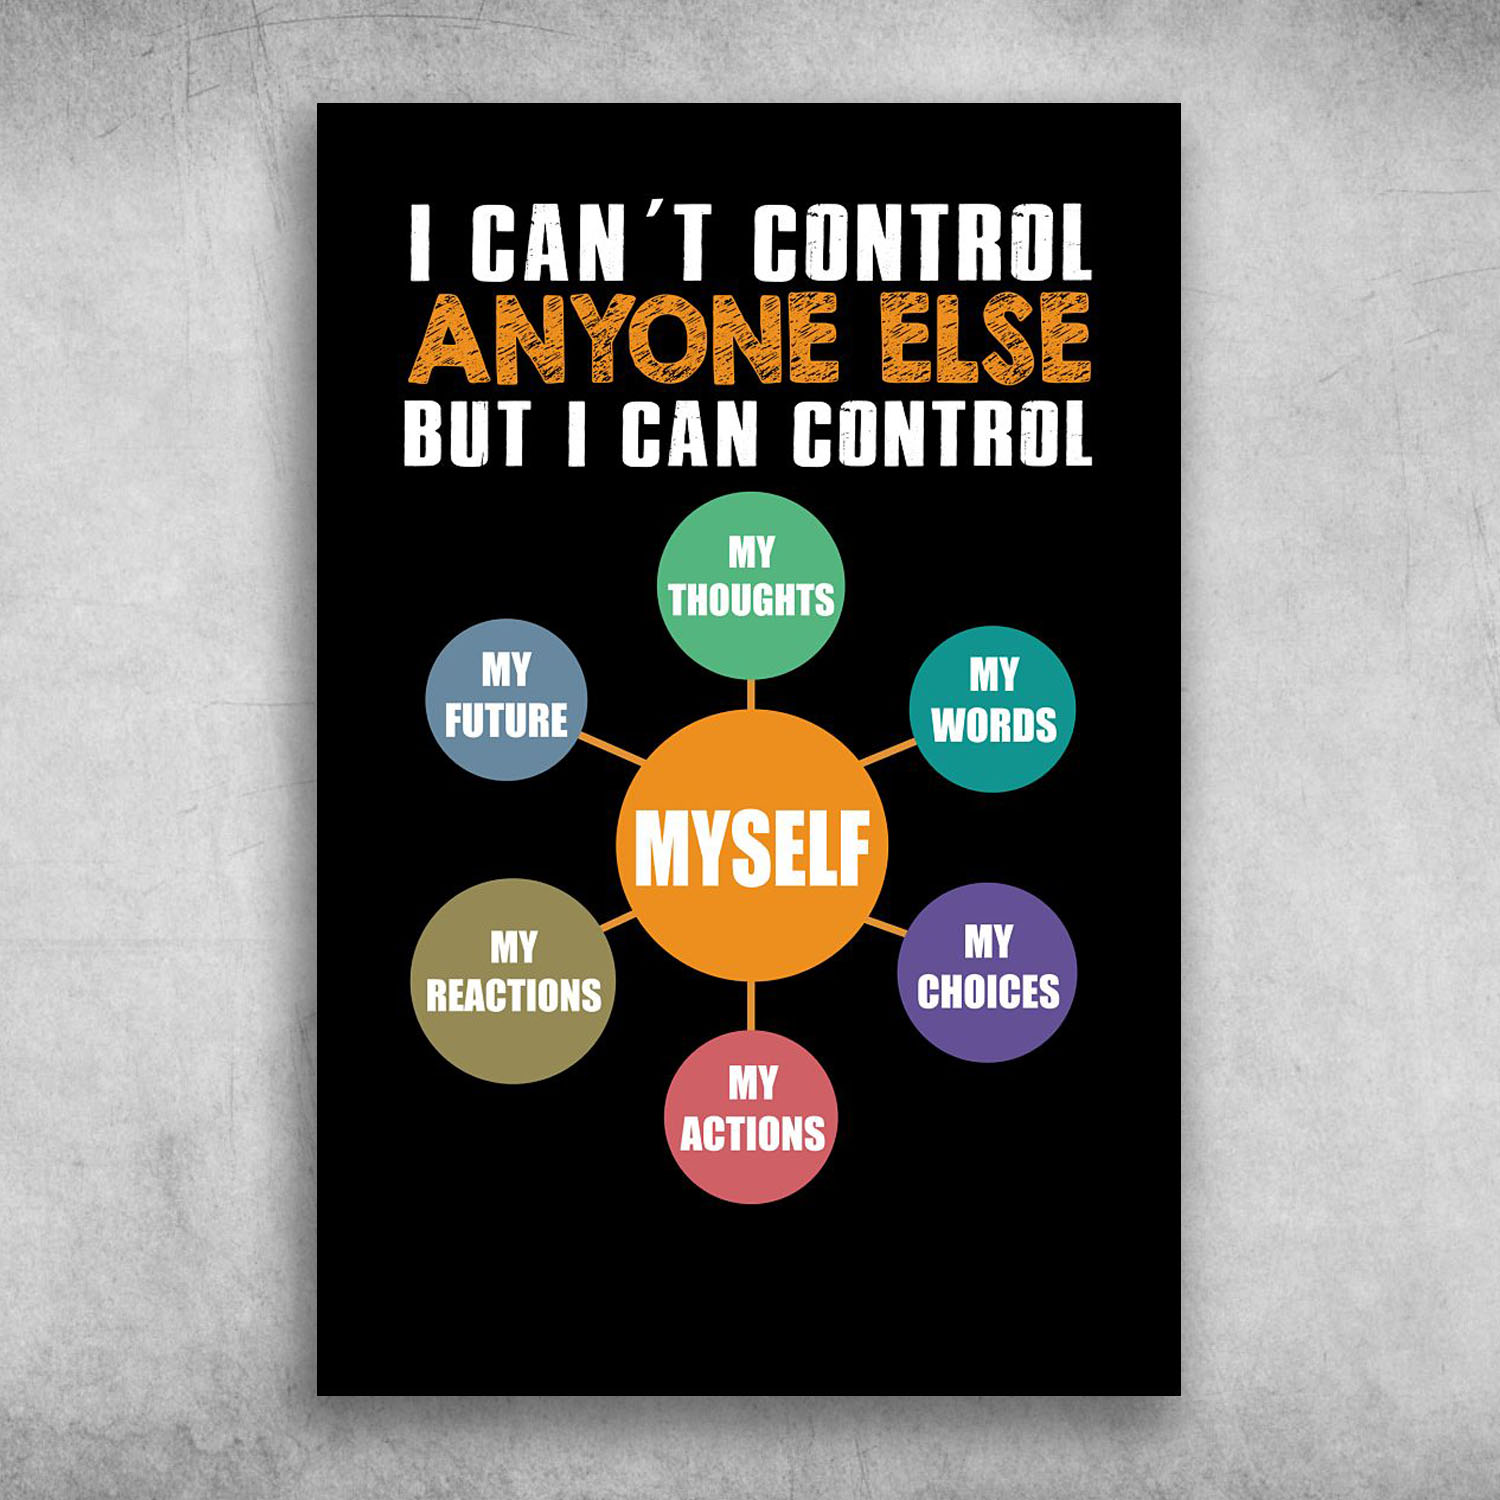 I Can't Control Anyone Else But I Can Control Myself